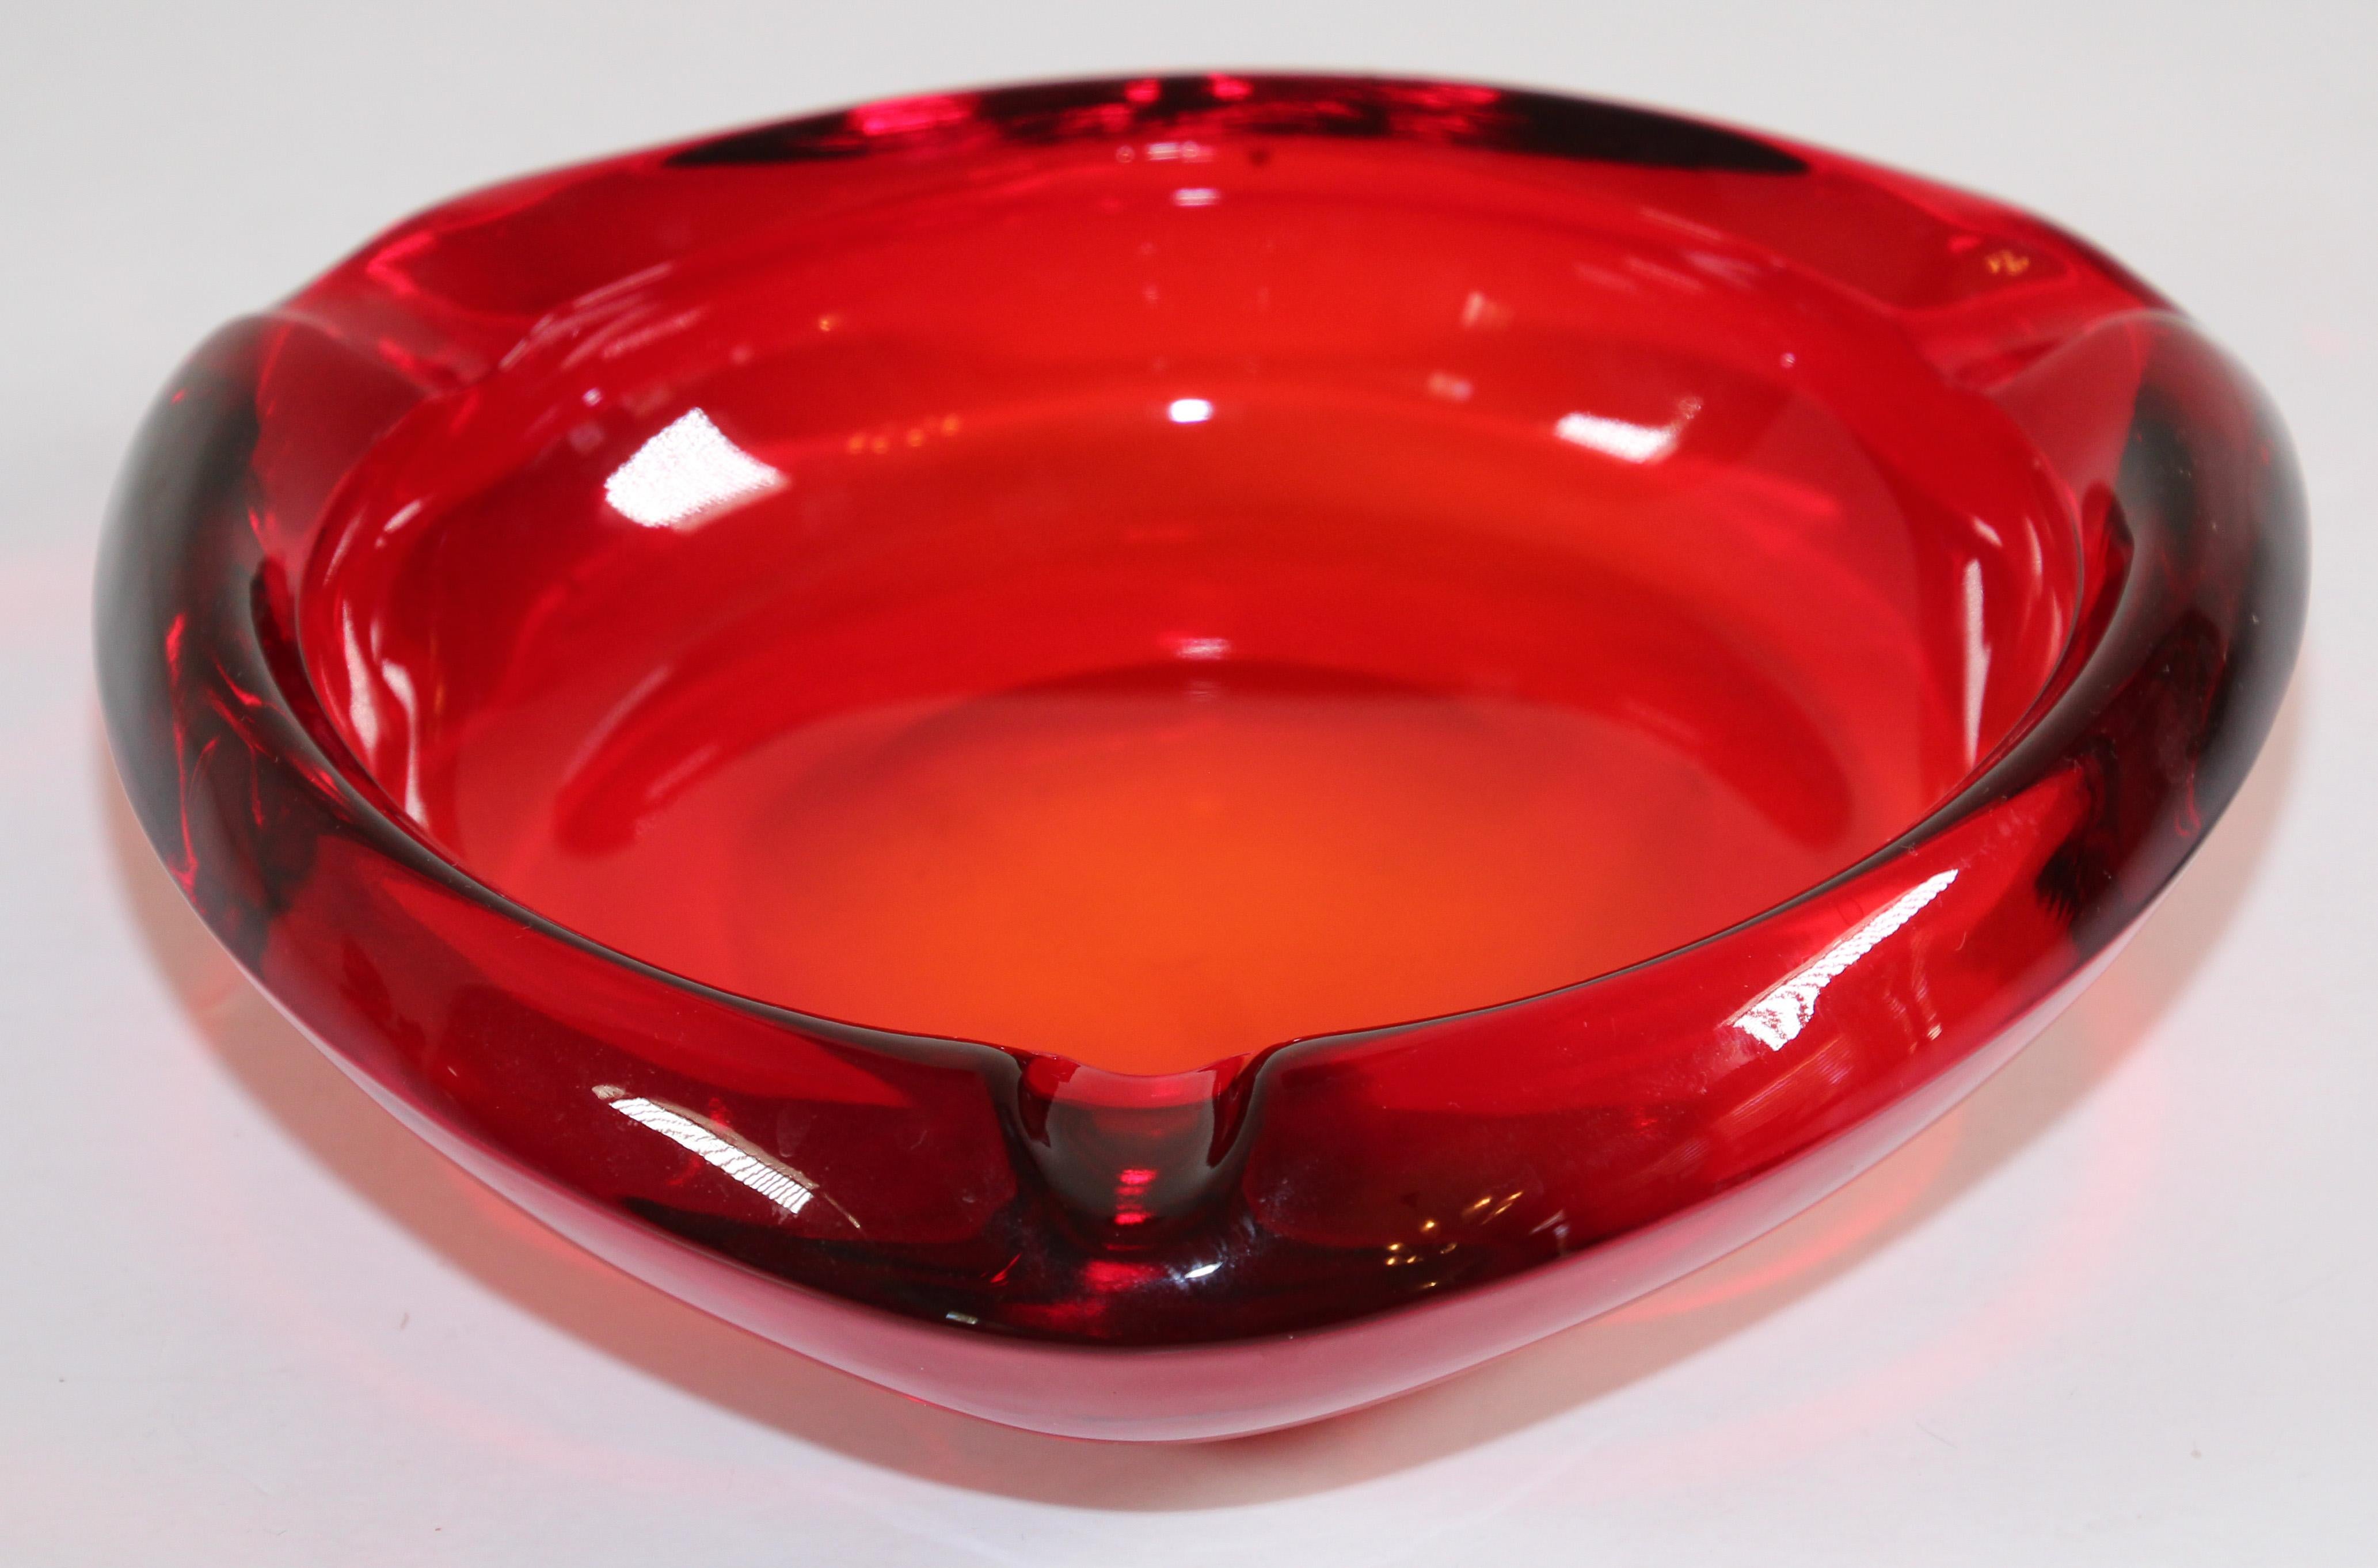 Hand-Crafted Vintage Mid-Century Glass Ashtray Ruby Red Triangular For Sale